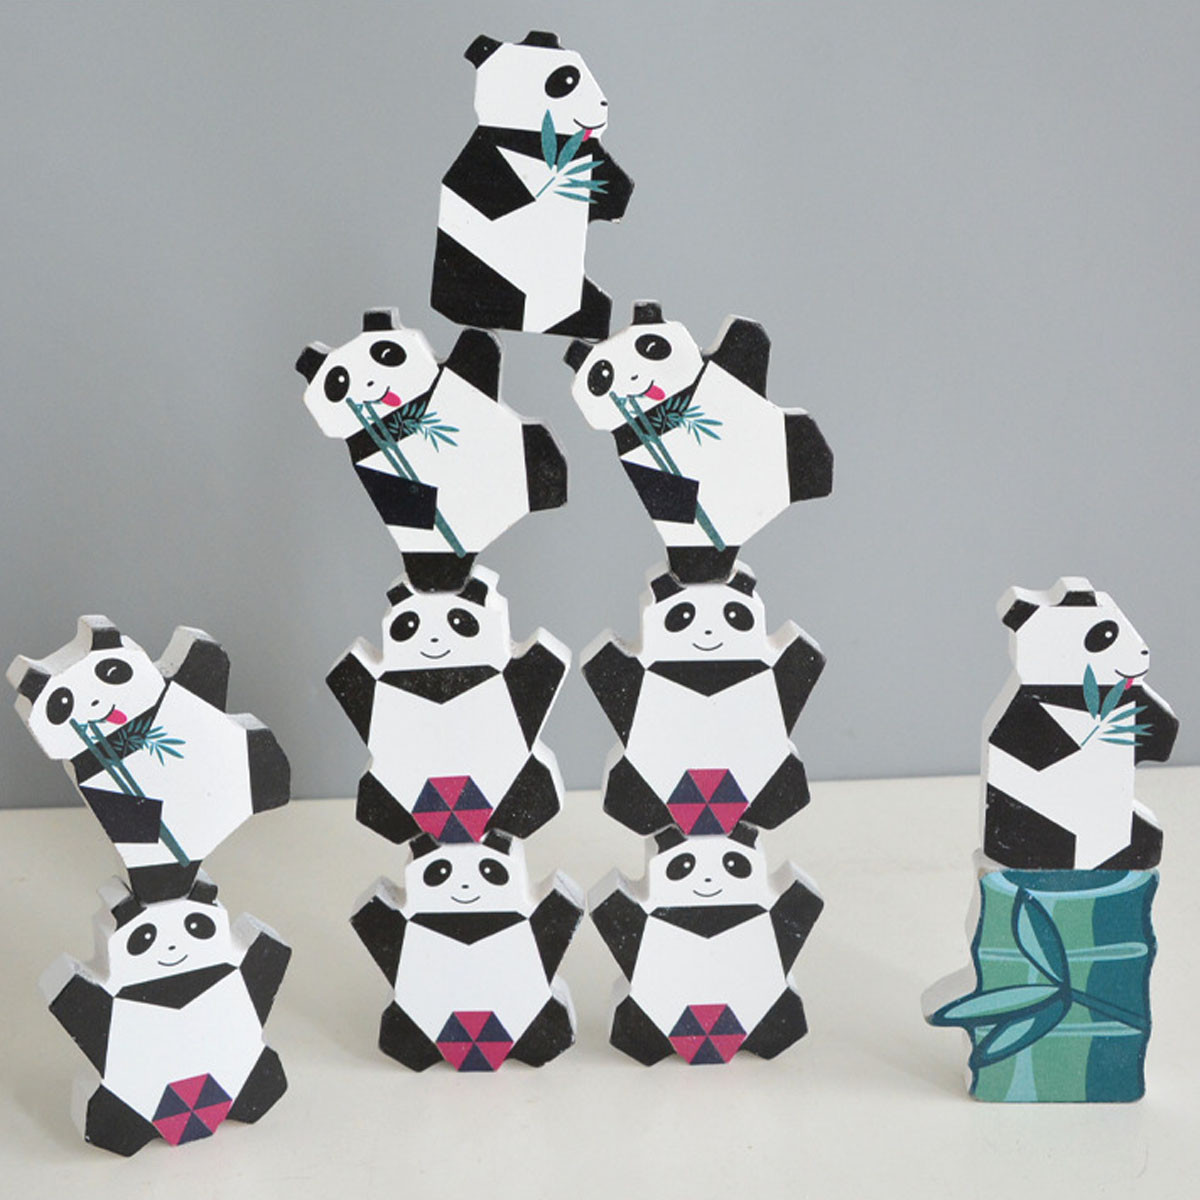 1113-Pcs-Creative-Panda-Dinosaur-Wooden-Stacking-Game-Building-Blocks-Early-Educational-Toy-for-Kids-1717485-7